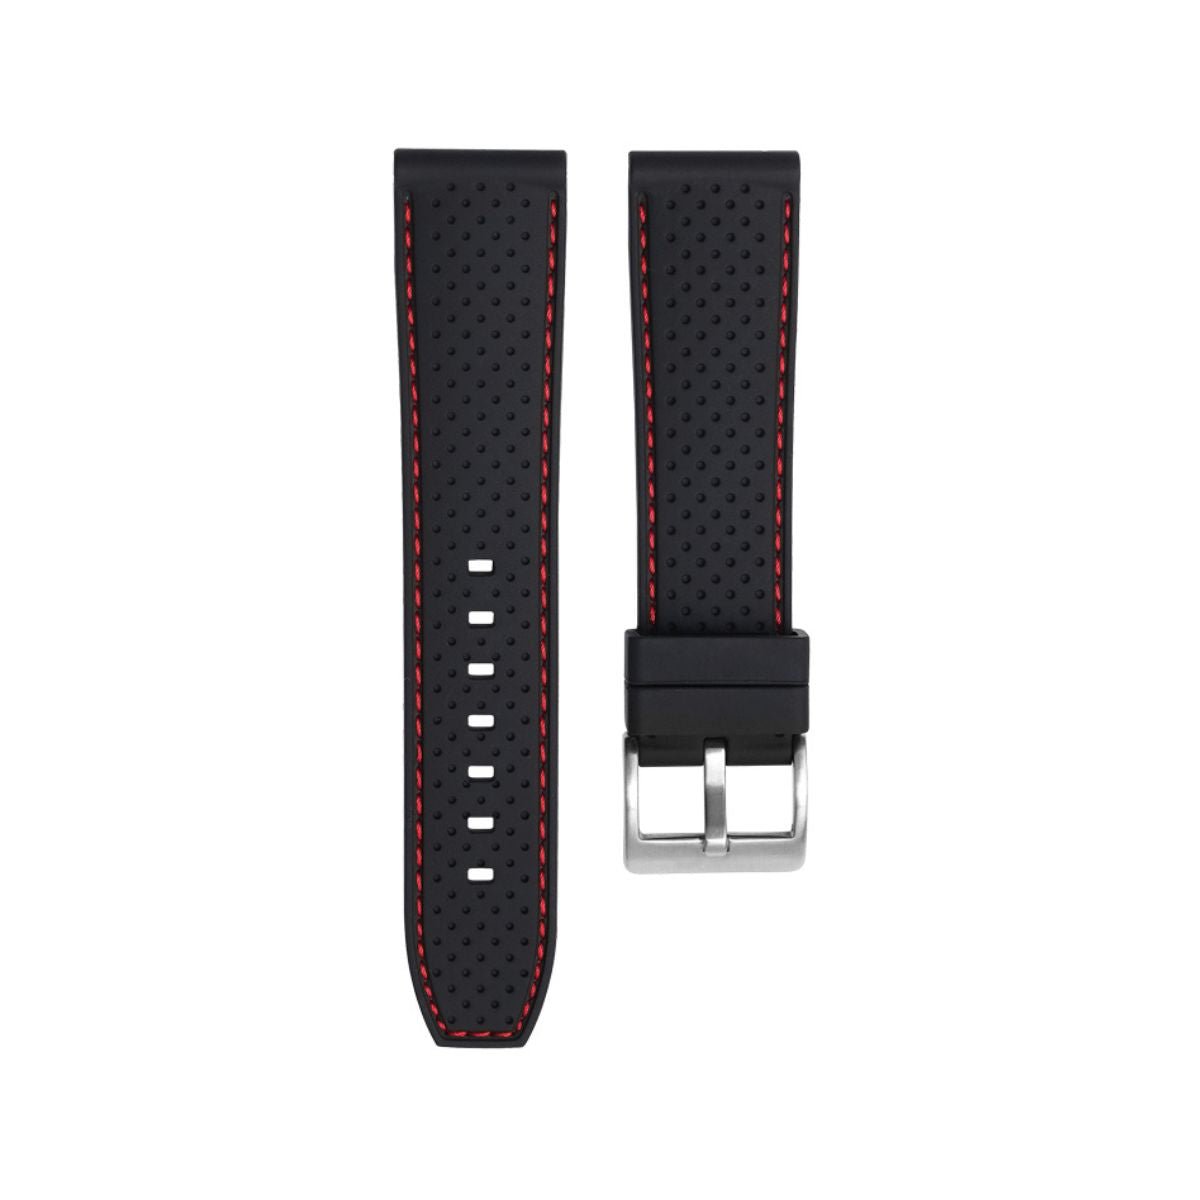 Perforated Stitch Soft Silicone Strap - Quick-Release - Black with Red Stitch -StrapSeeker